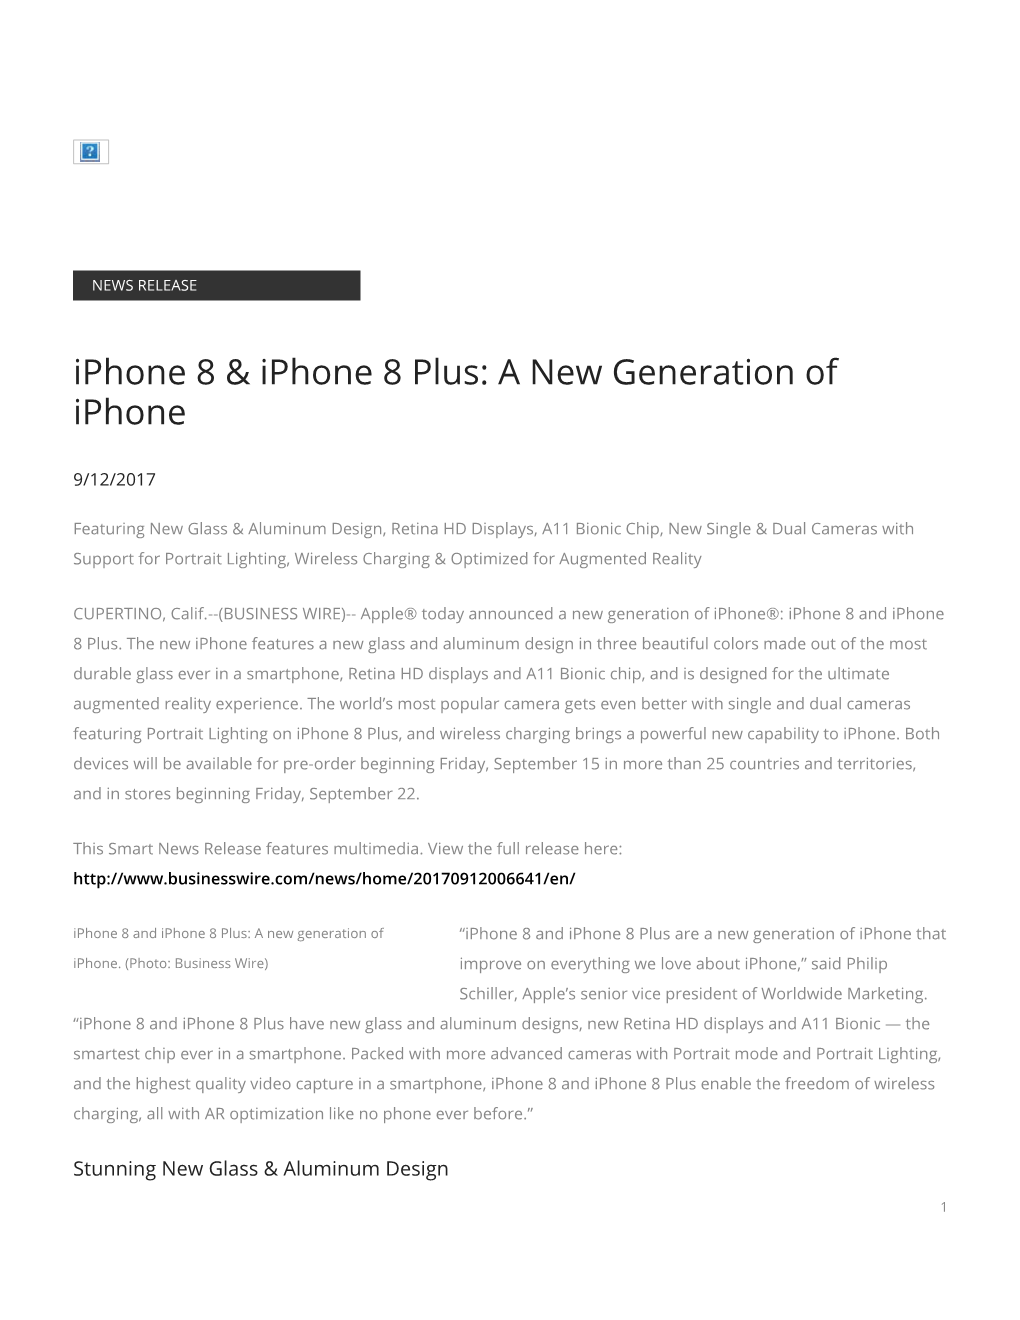 Iphone 8 & Iphone 8 Plus: a New Generation of Iphone